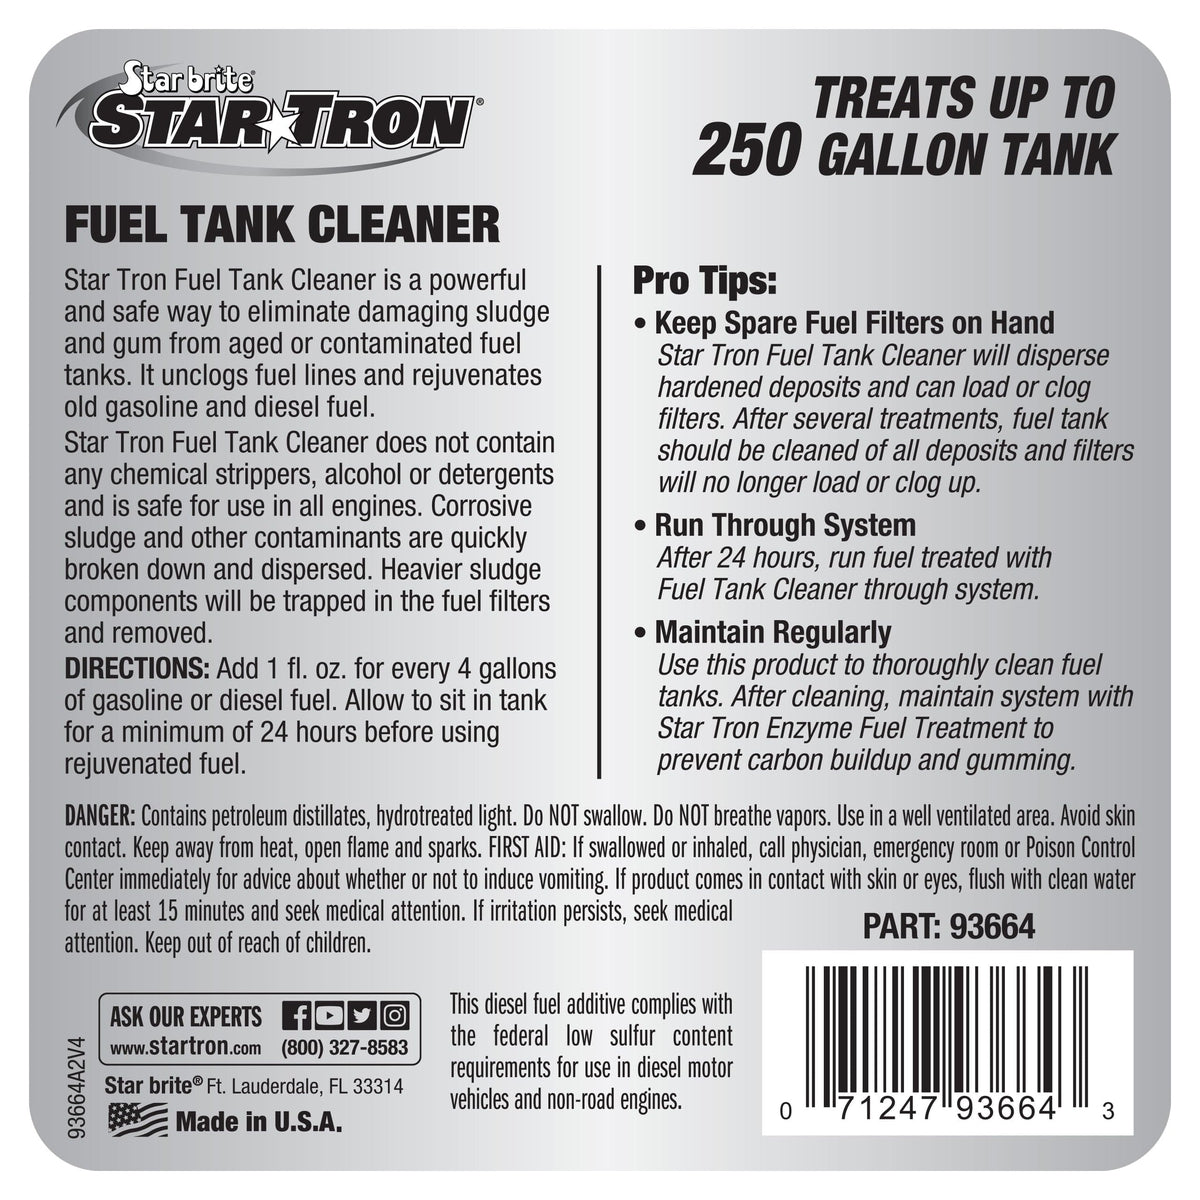 Star Brite Qualifies for Free Shipping Star brite Star Tron Tank Cleaner 64 oz #093664